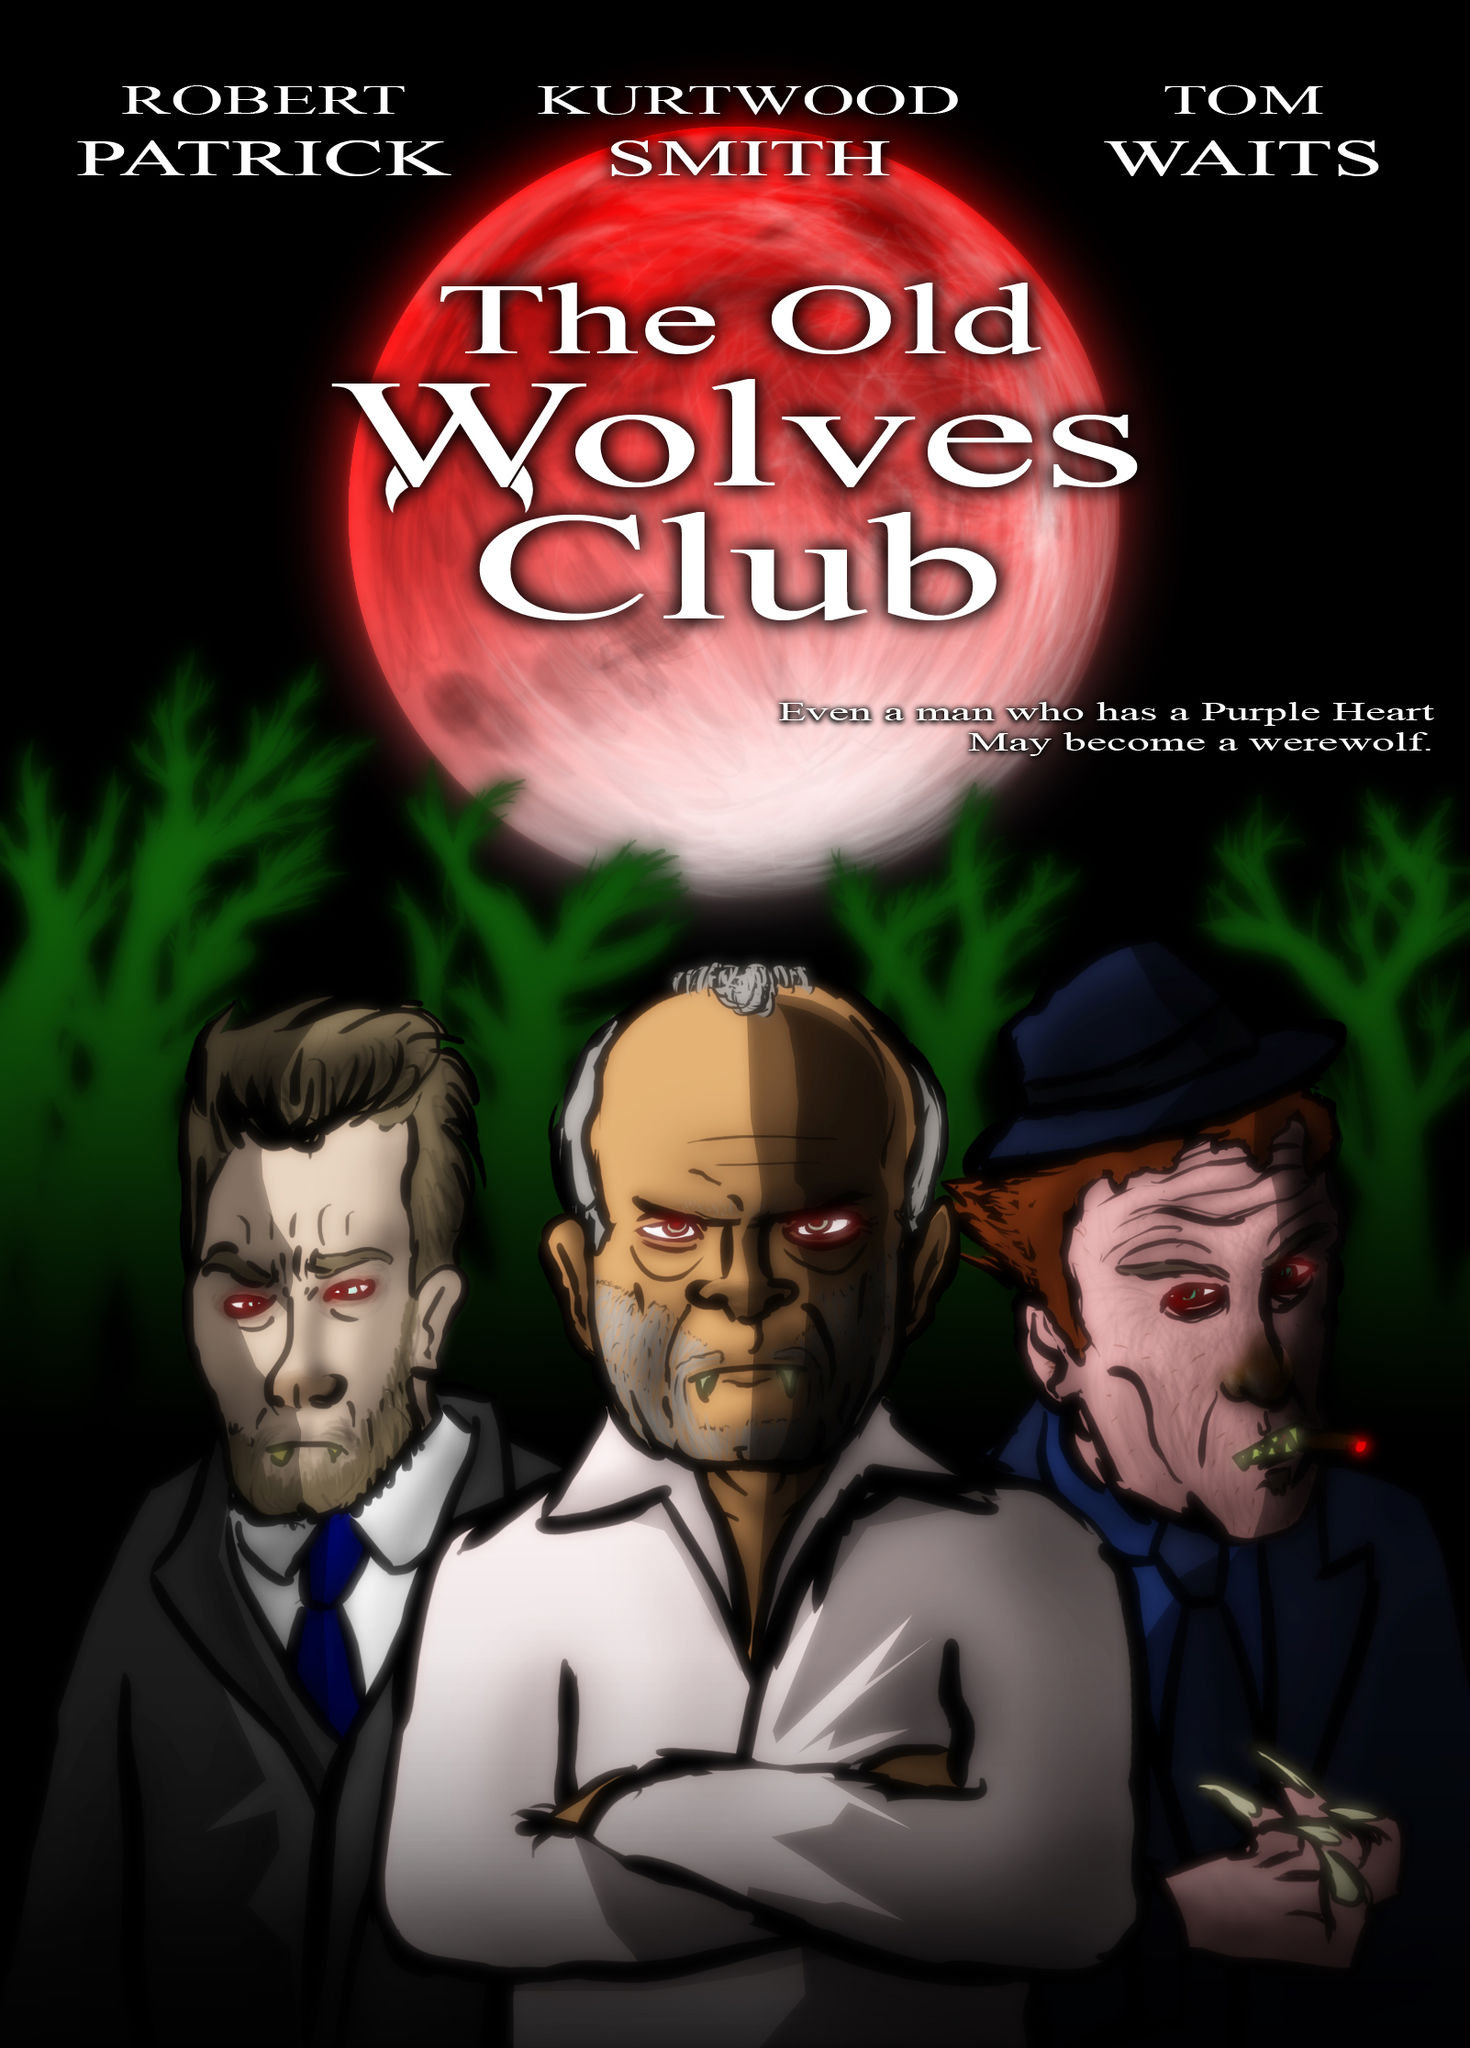 THE OLD WOLVES CLUB